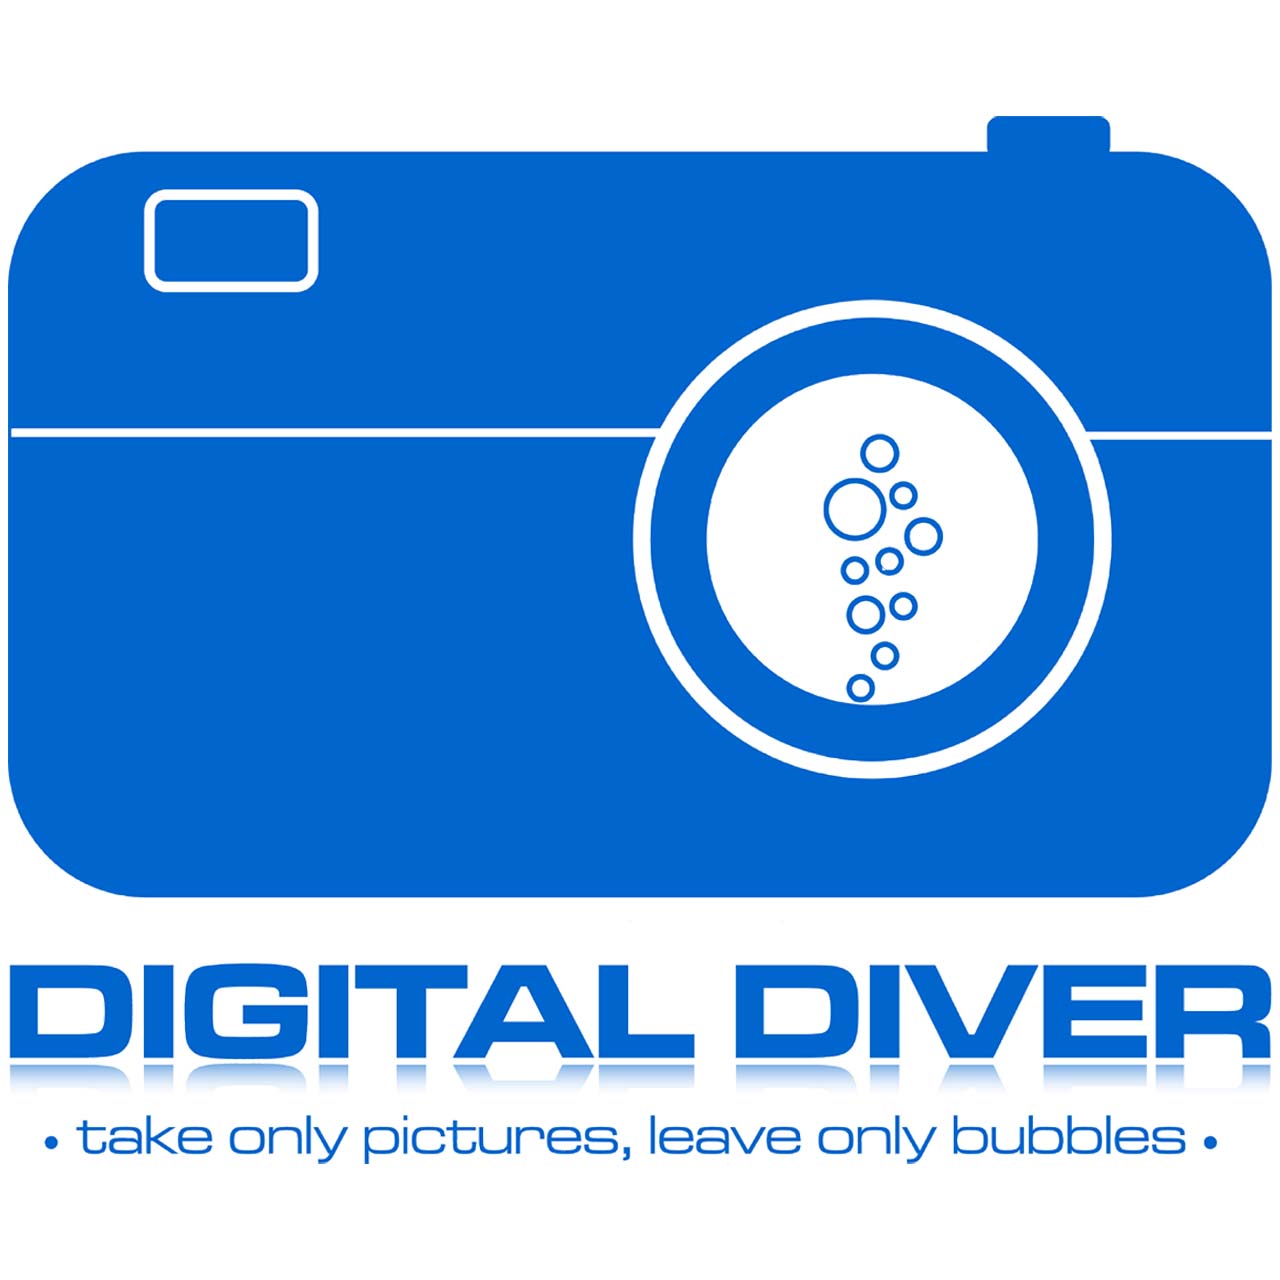 200DLM/A Underwater Housing for Sony Alpha a6100, a6300, a6400, a6500